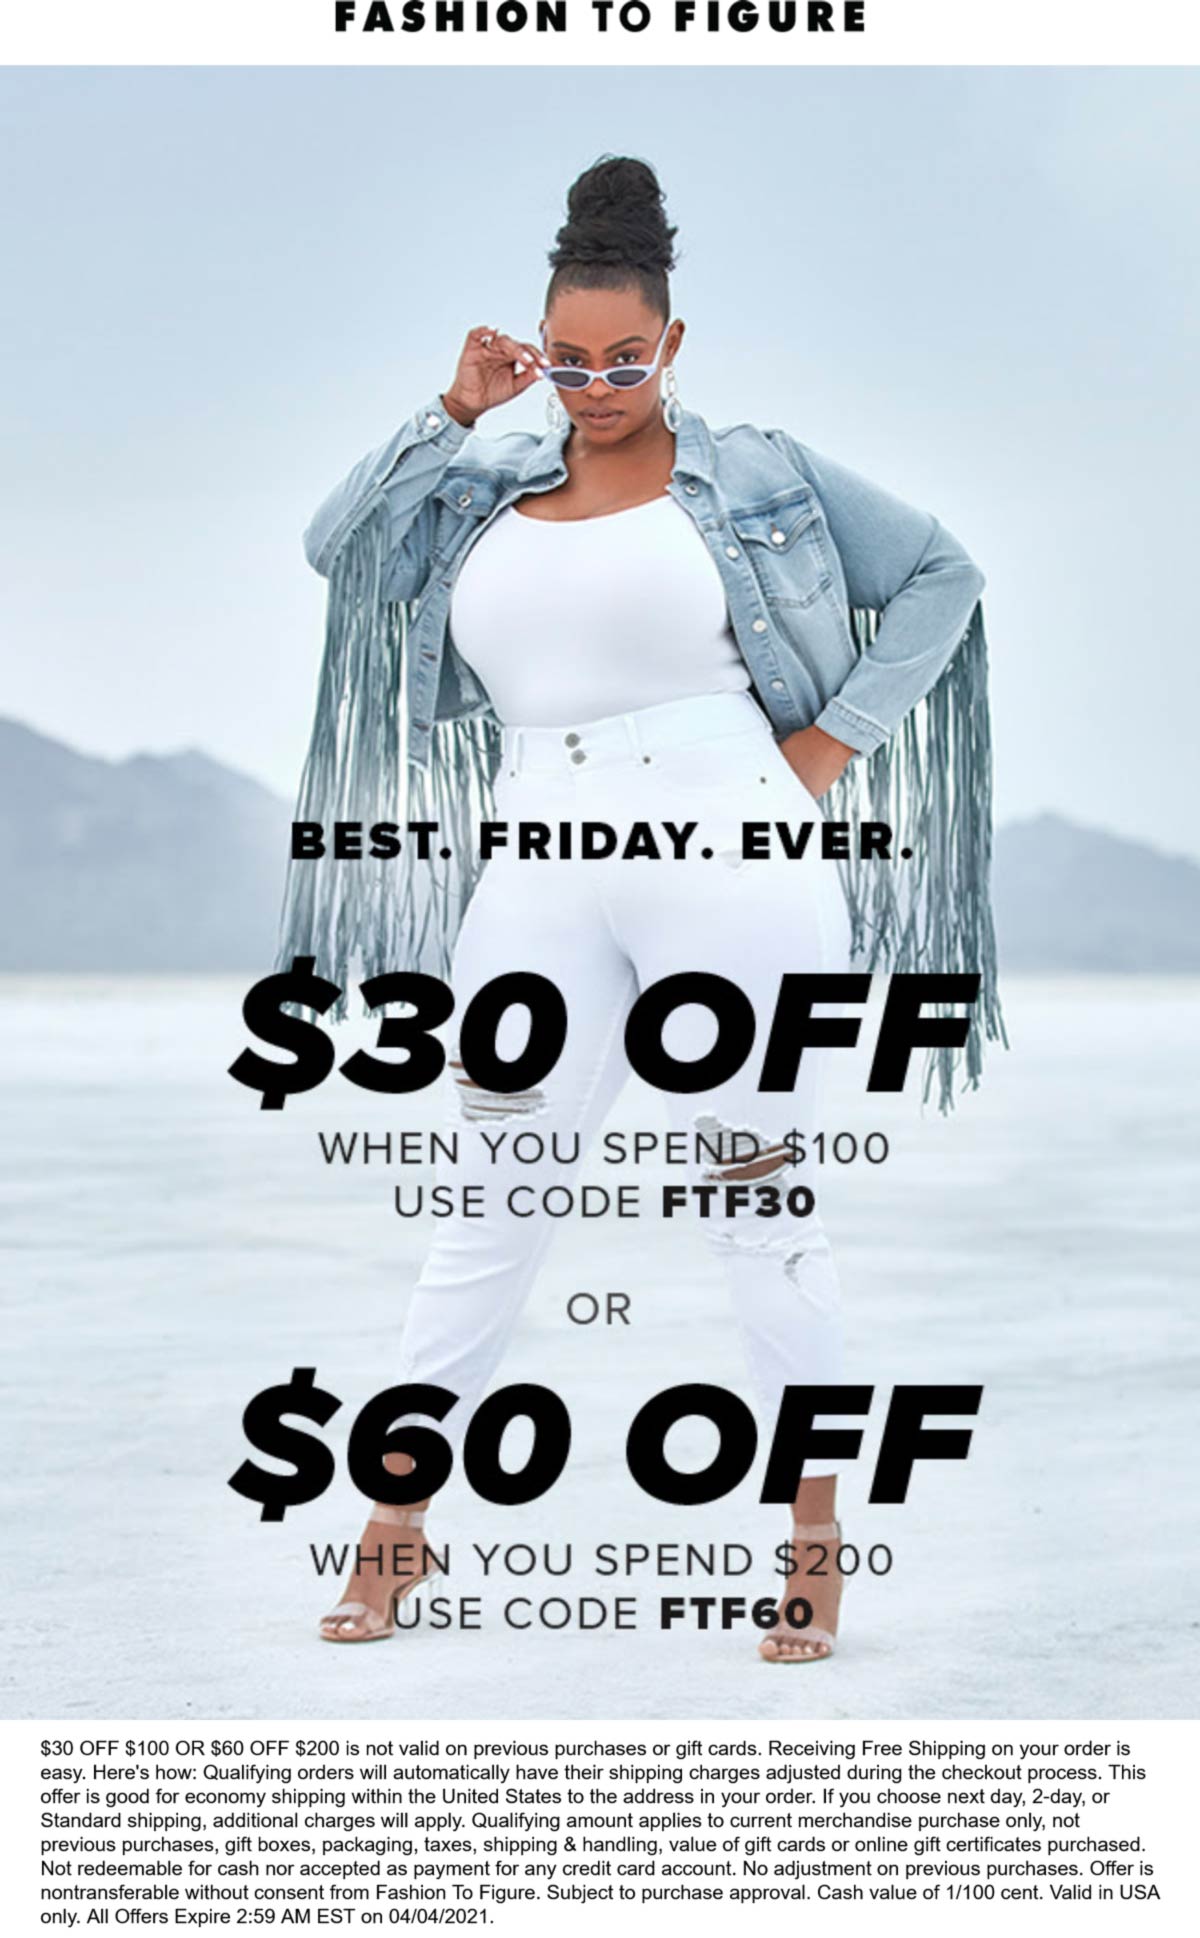 Fashion to Figure stores Coupon  $30 off $100 & more at Fashion to Figure via promo code FTF30 or FTF60 #fashiontofigure 